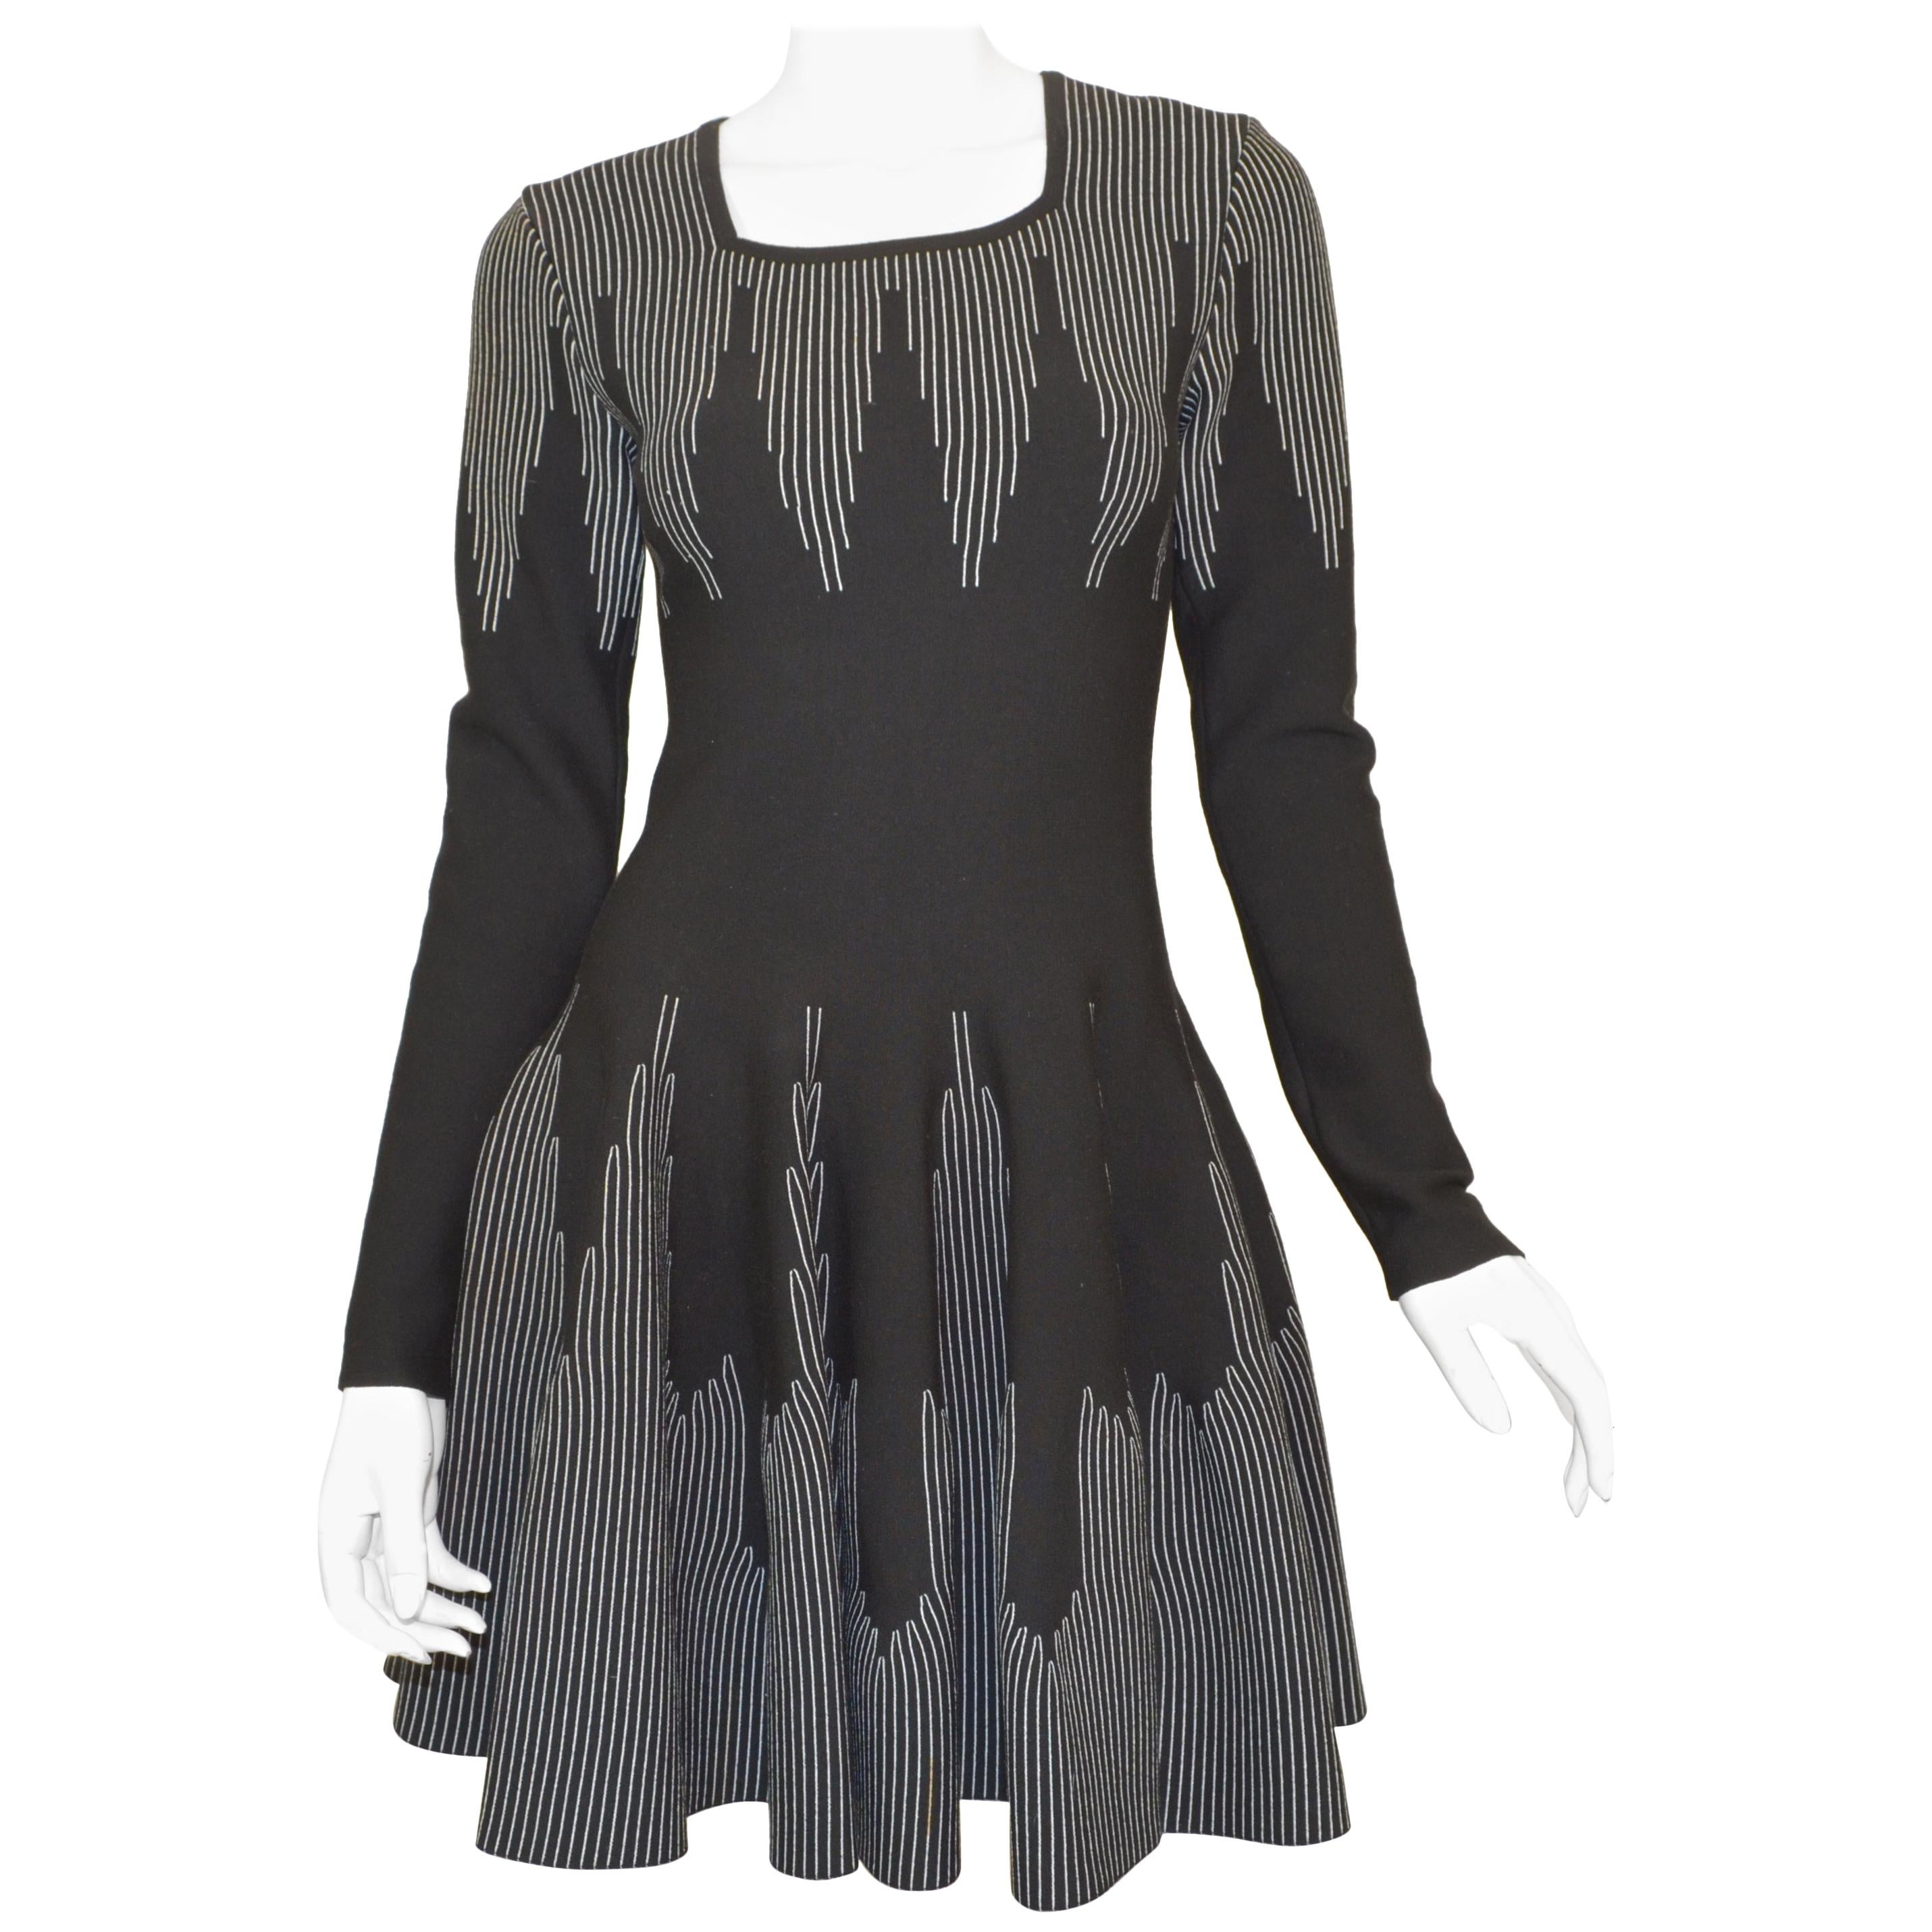 Alaia Black and White Knit Fit and Flare Dress